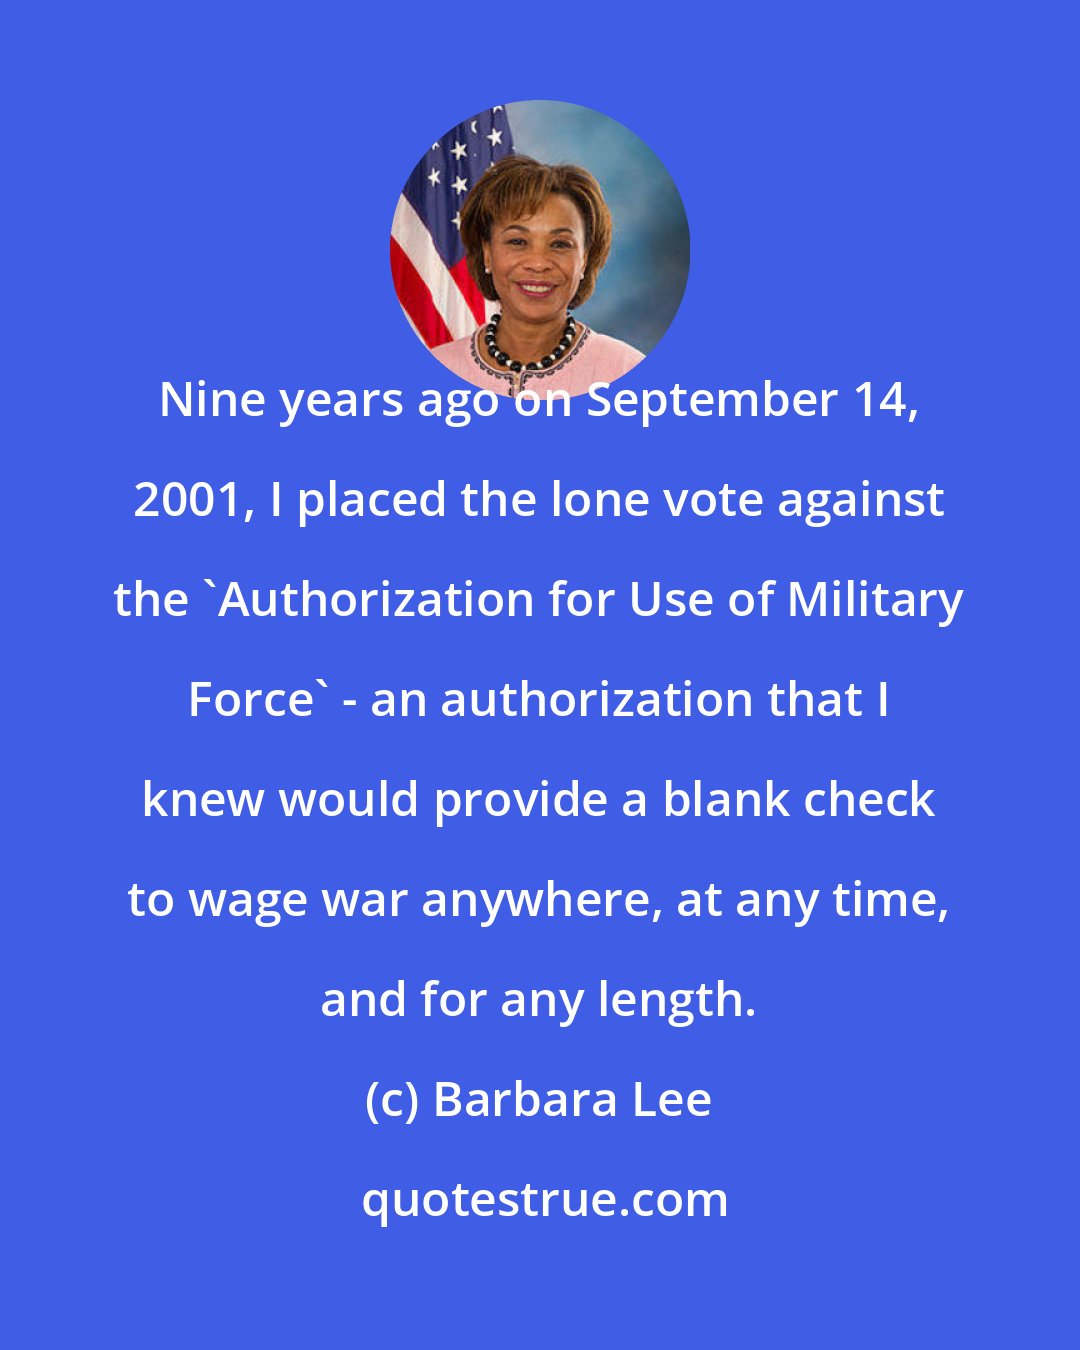 Barbara Lee: Nine years ago on September 14, 2001, I placed the lone vote against the 'Authorization for Use of Military Force' - an authorization that I knew would provide a blank check to wage war anywhere, at any time, and for any length.